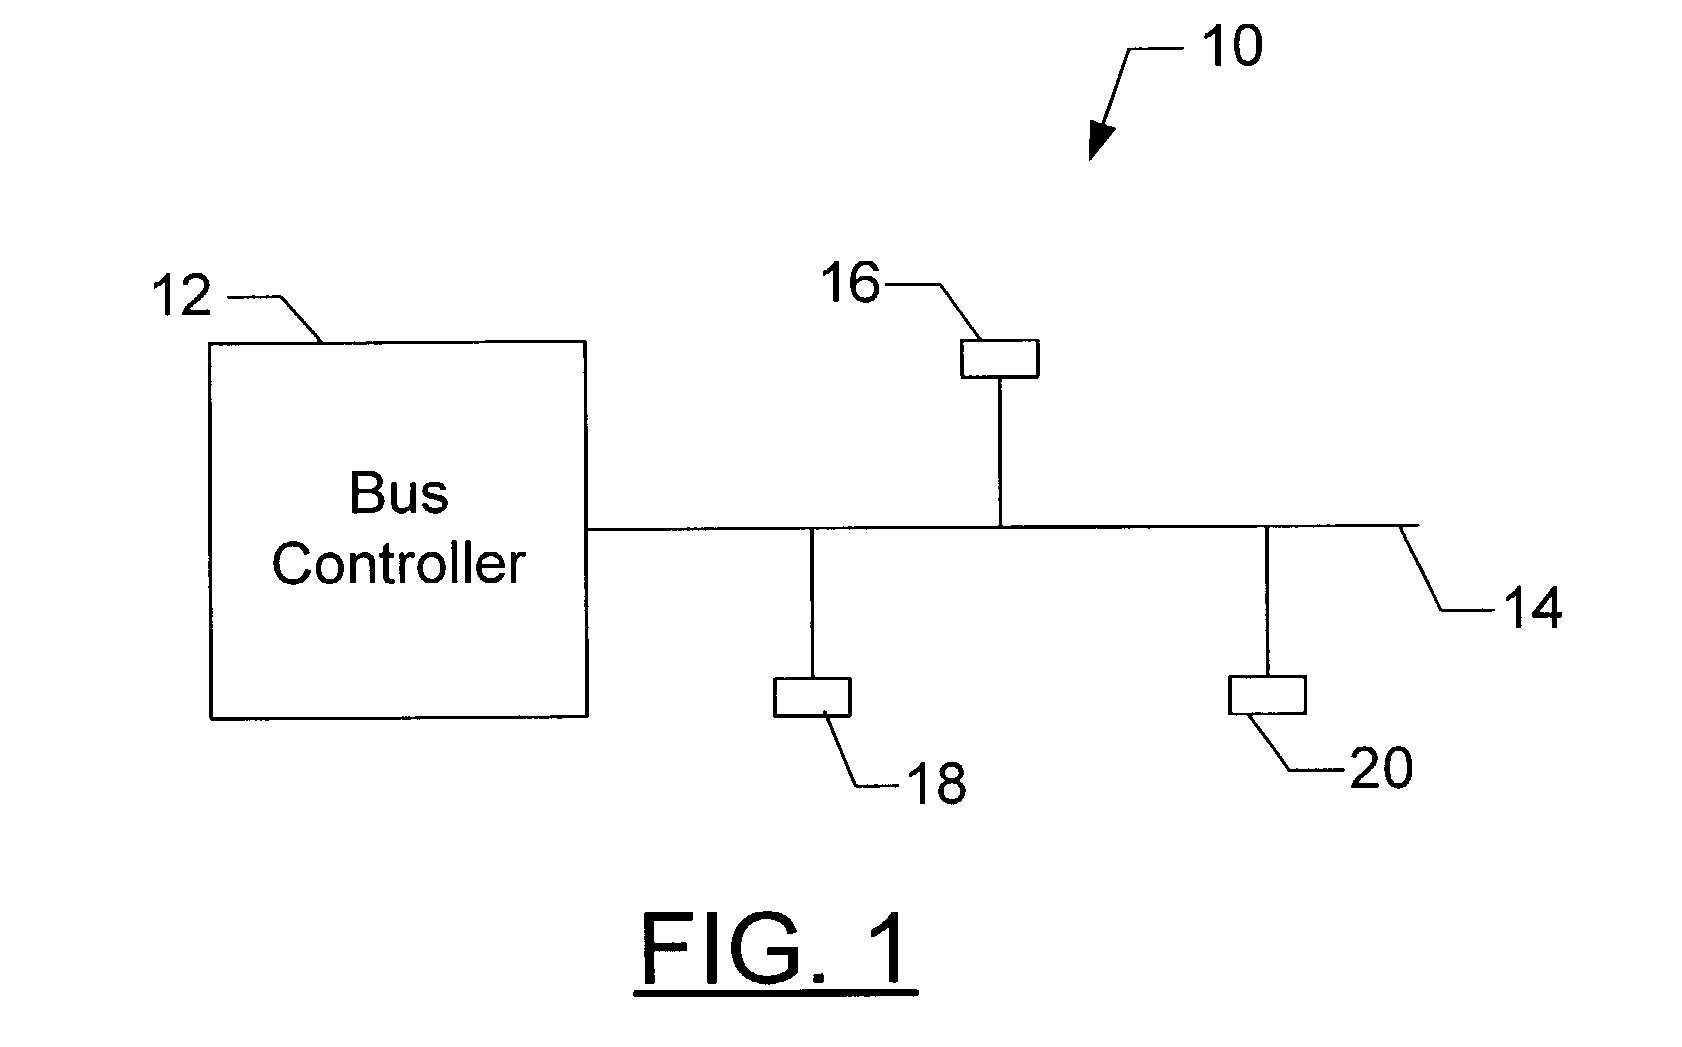 Systems and methods for establishing peer-to-peer communications between network devices communicating via a common bus